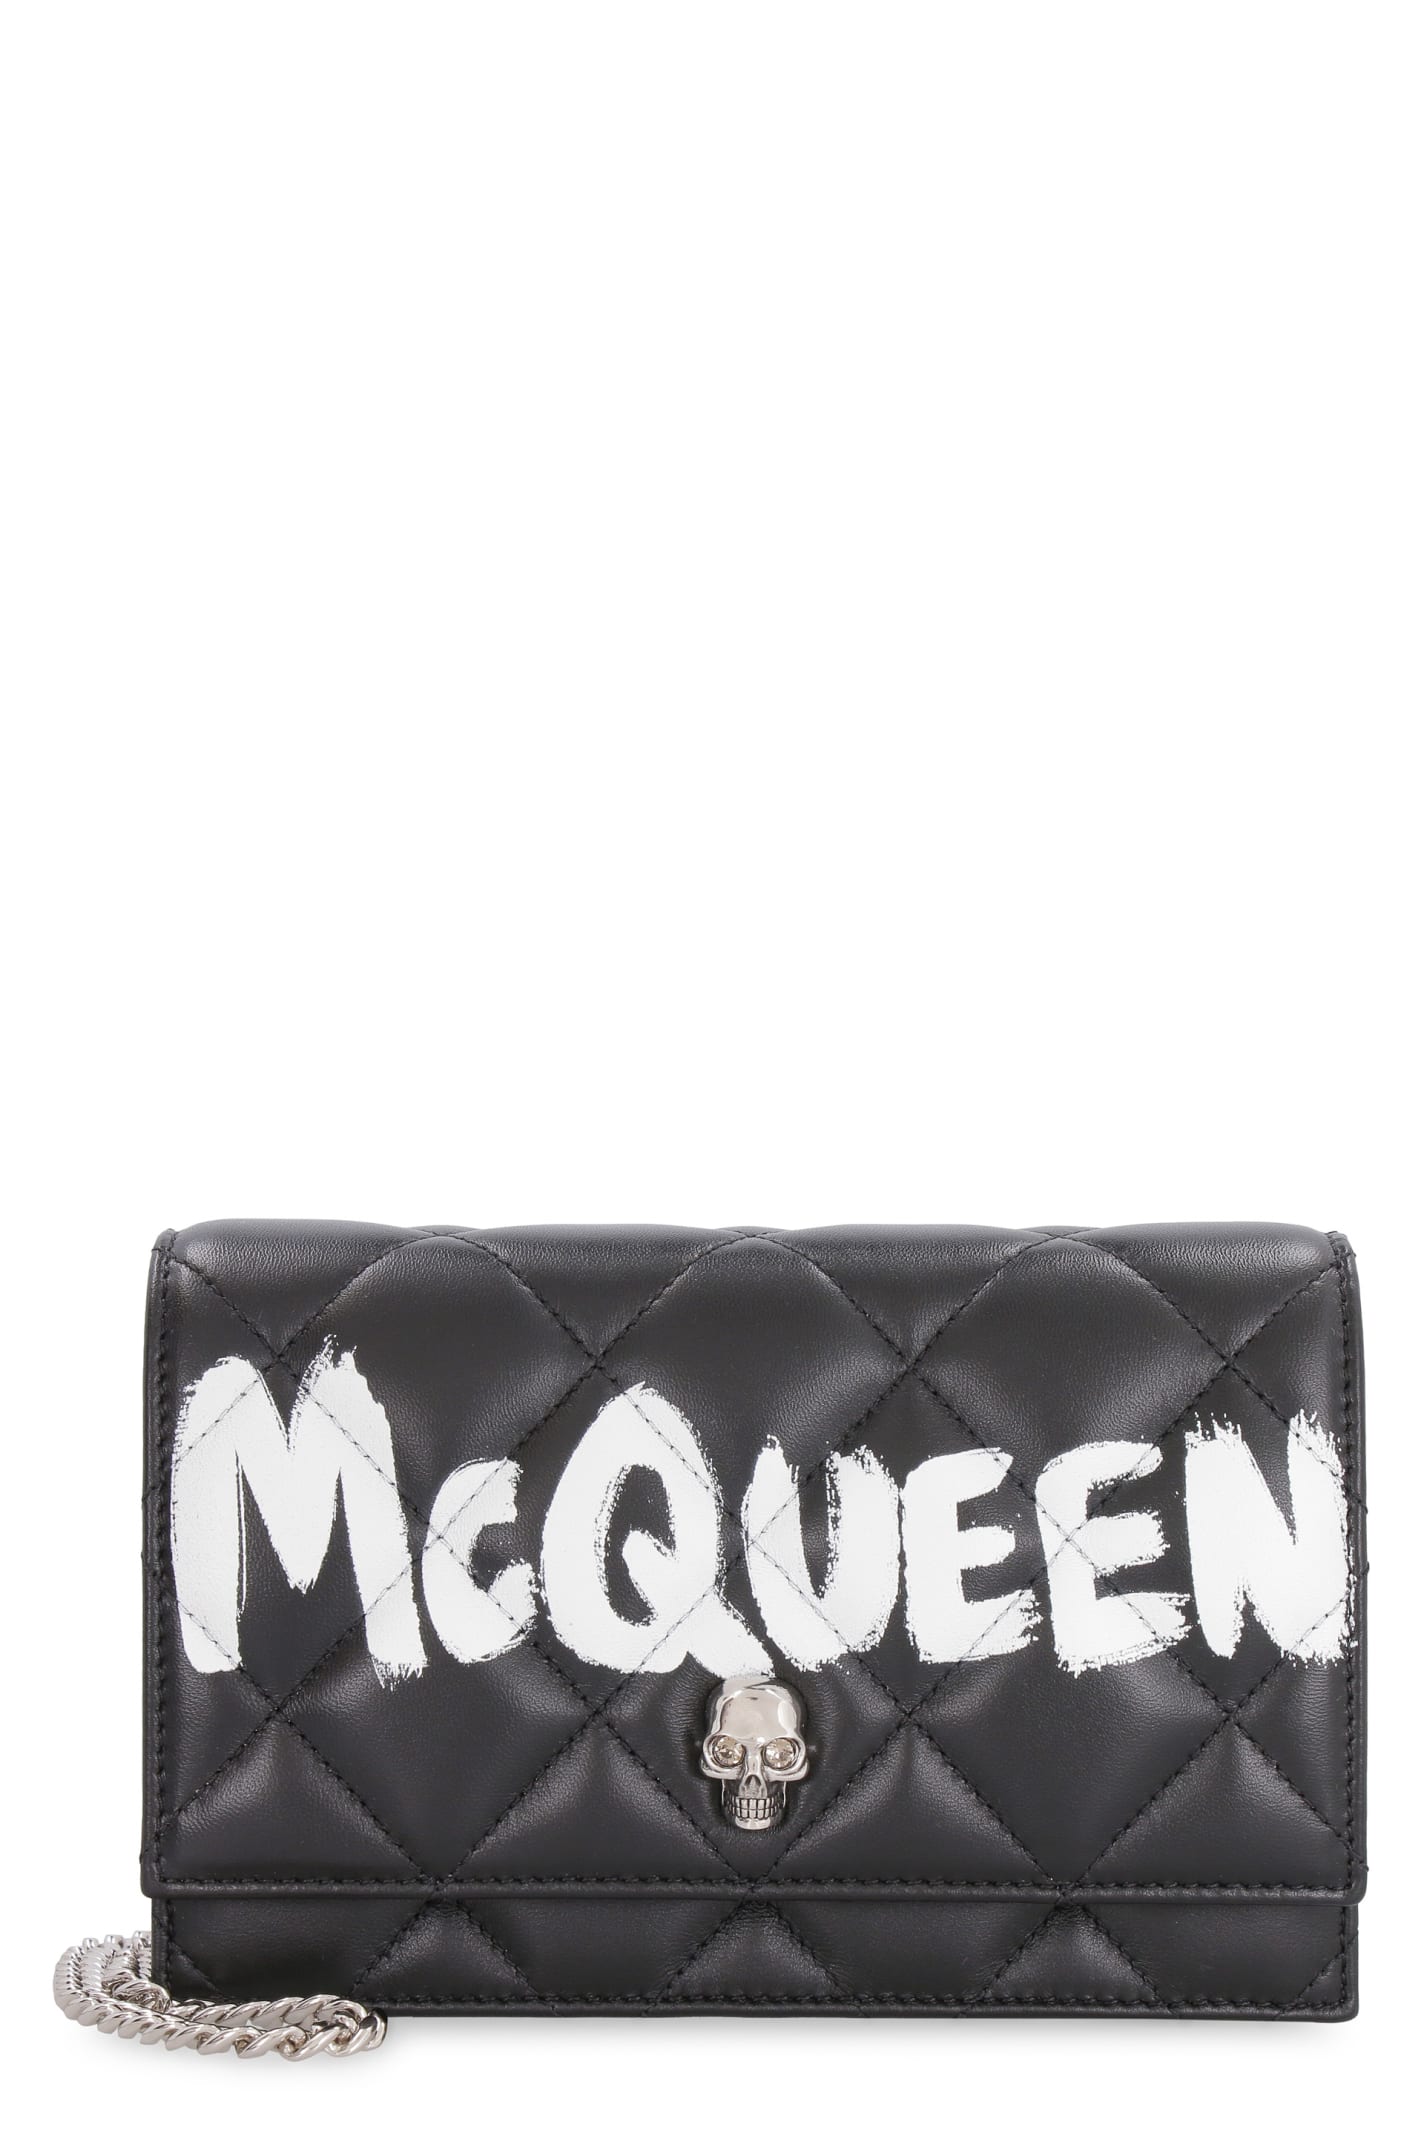 Alexander McQueen Skull Leather Clutch With Strap